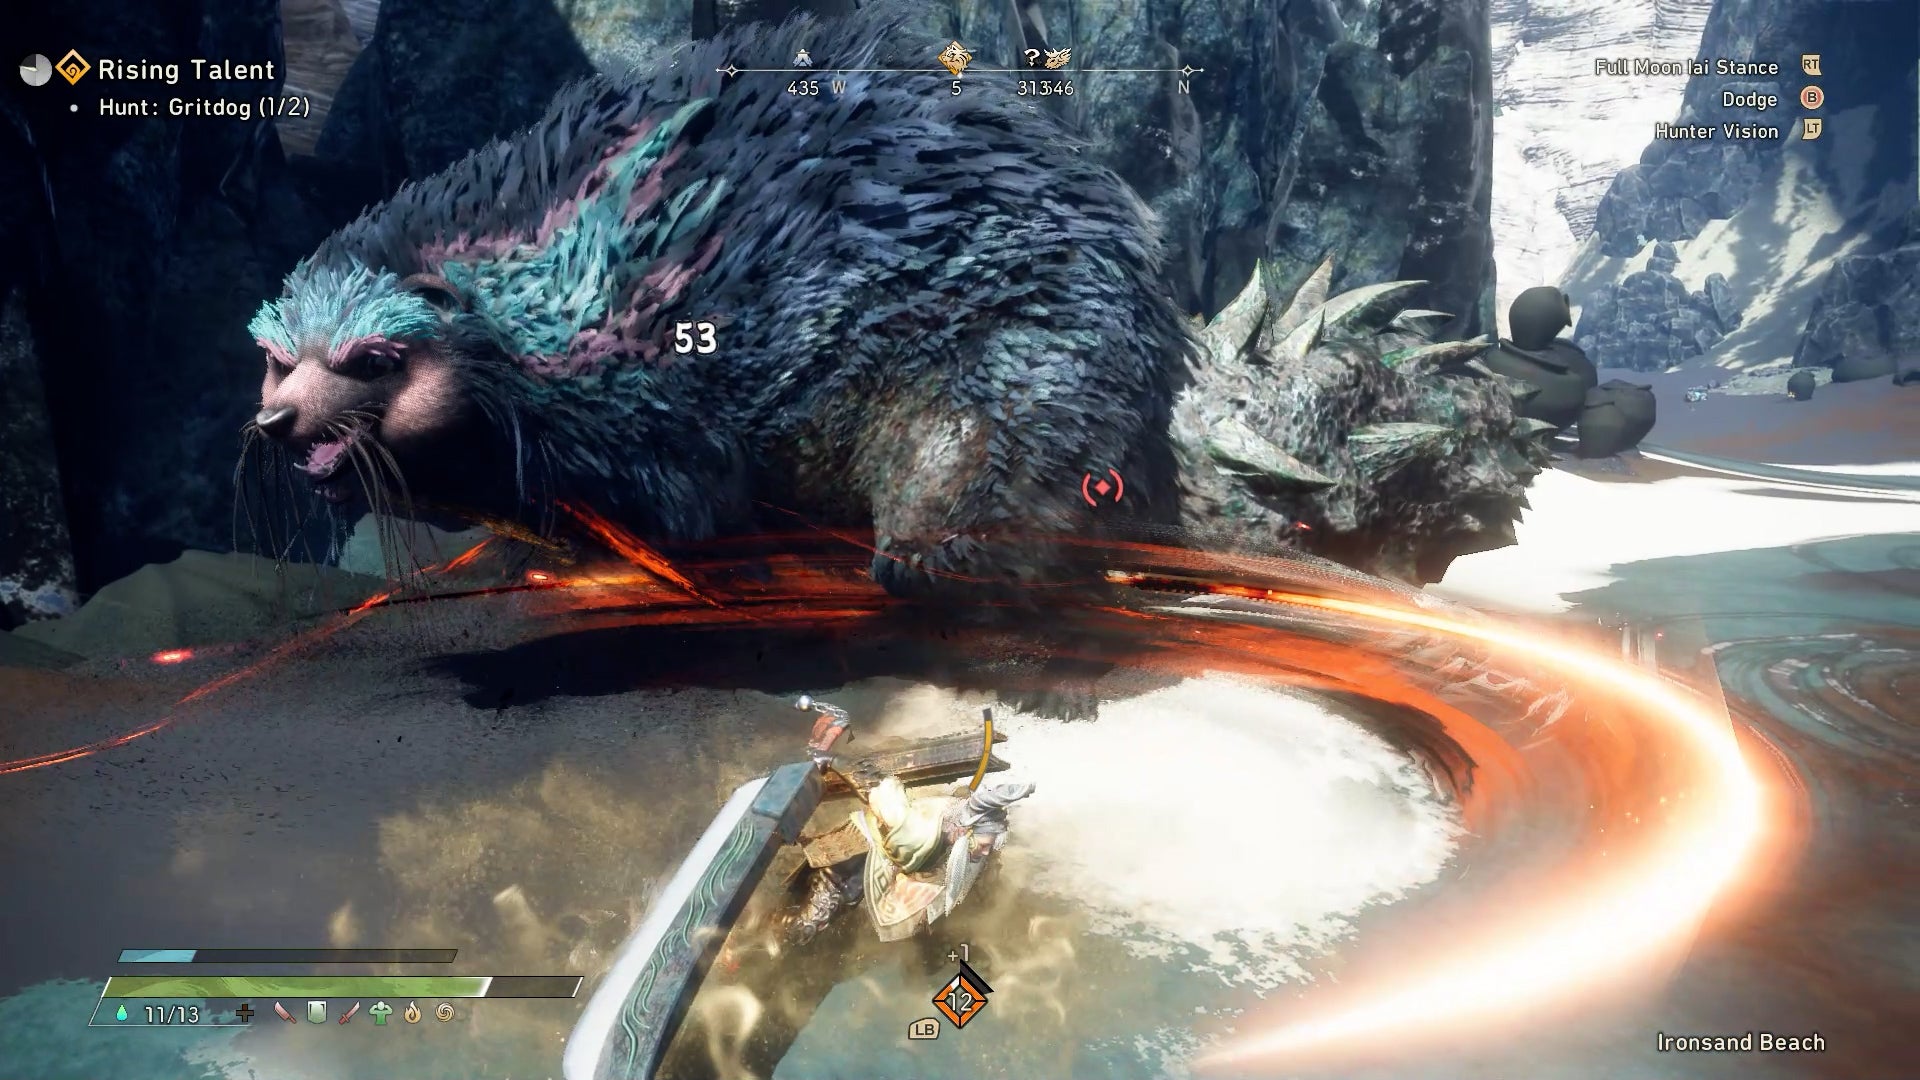 The huge dog creature is attacked by a hunter with a great sword.